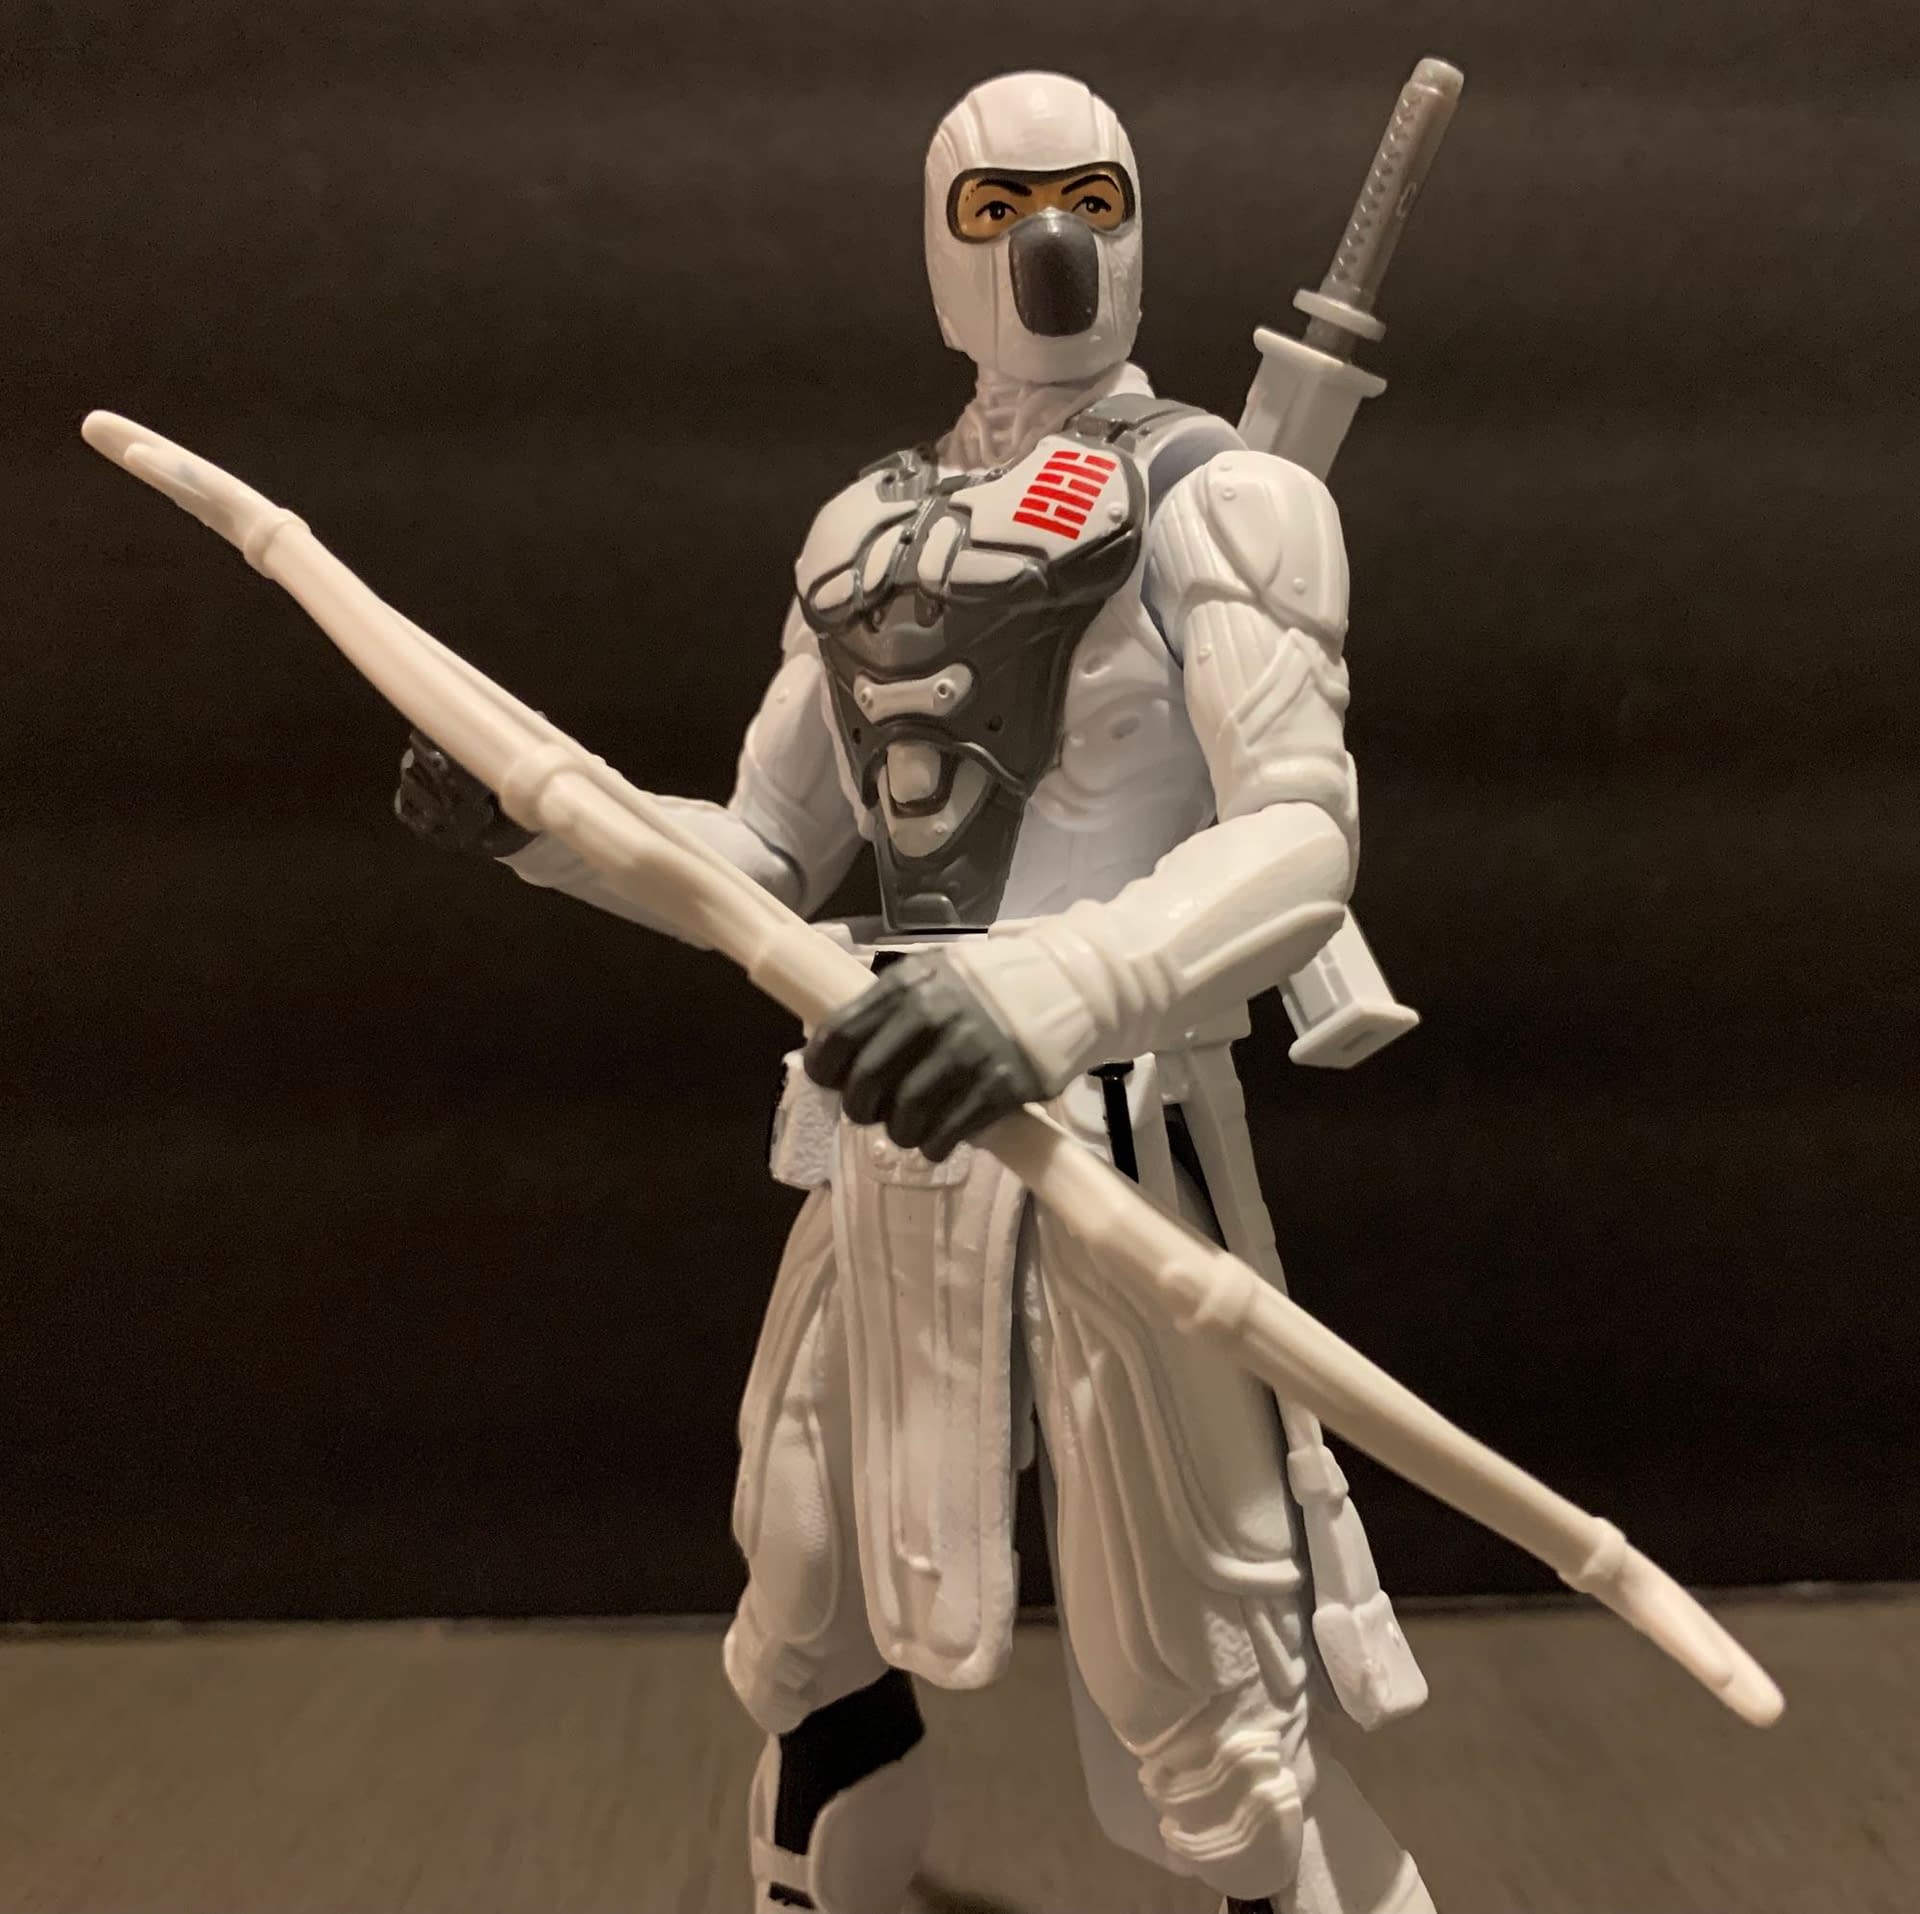 GI Joe Collectors: The New Basic Figures From Hasbro Are A Mixed Bag